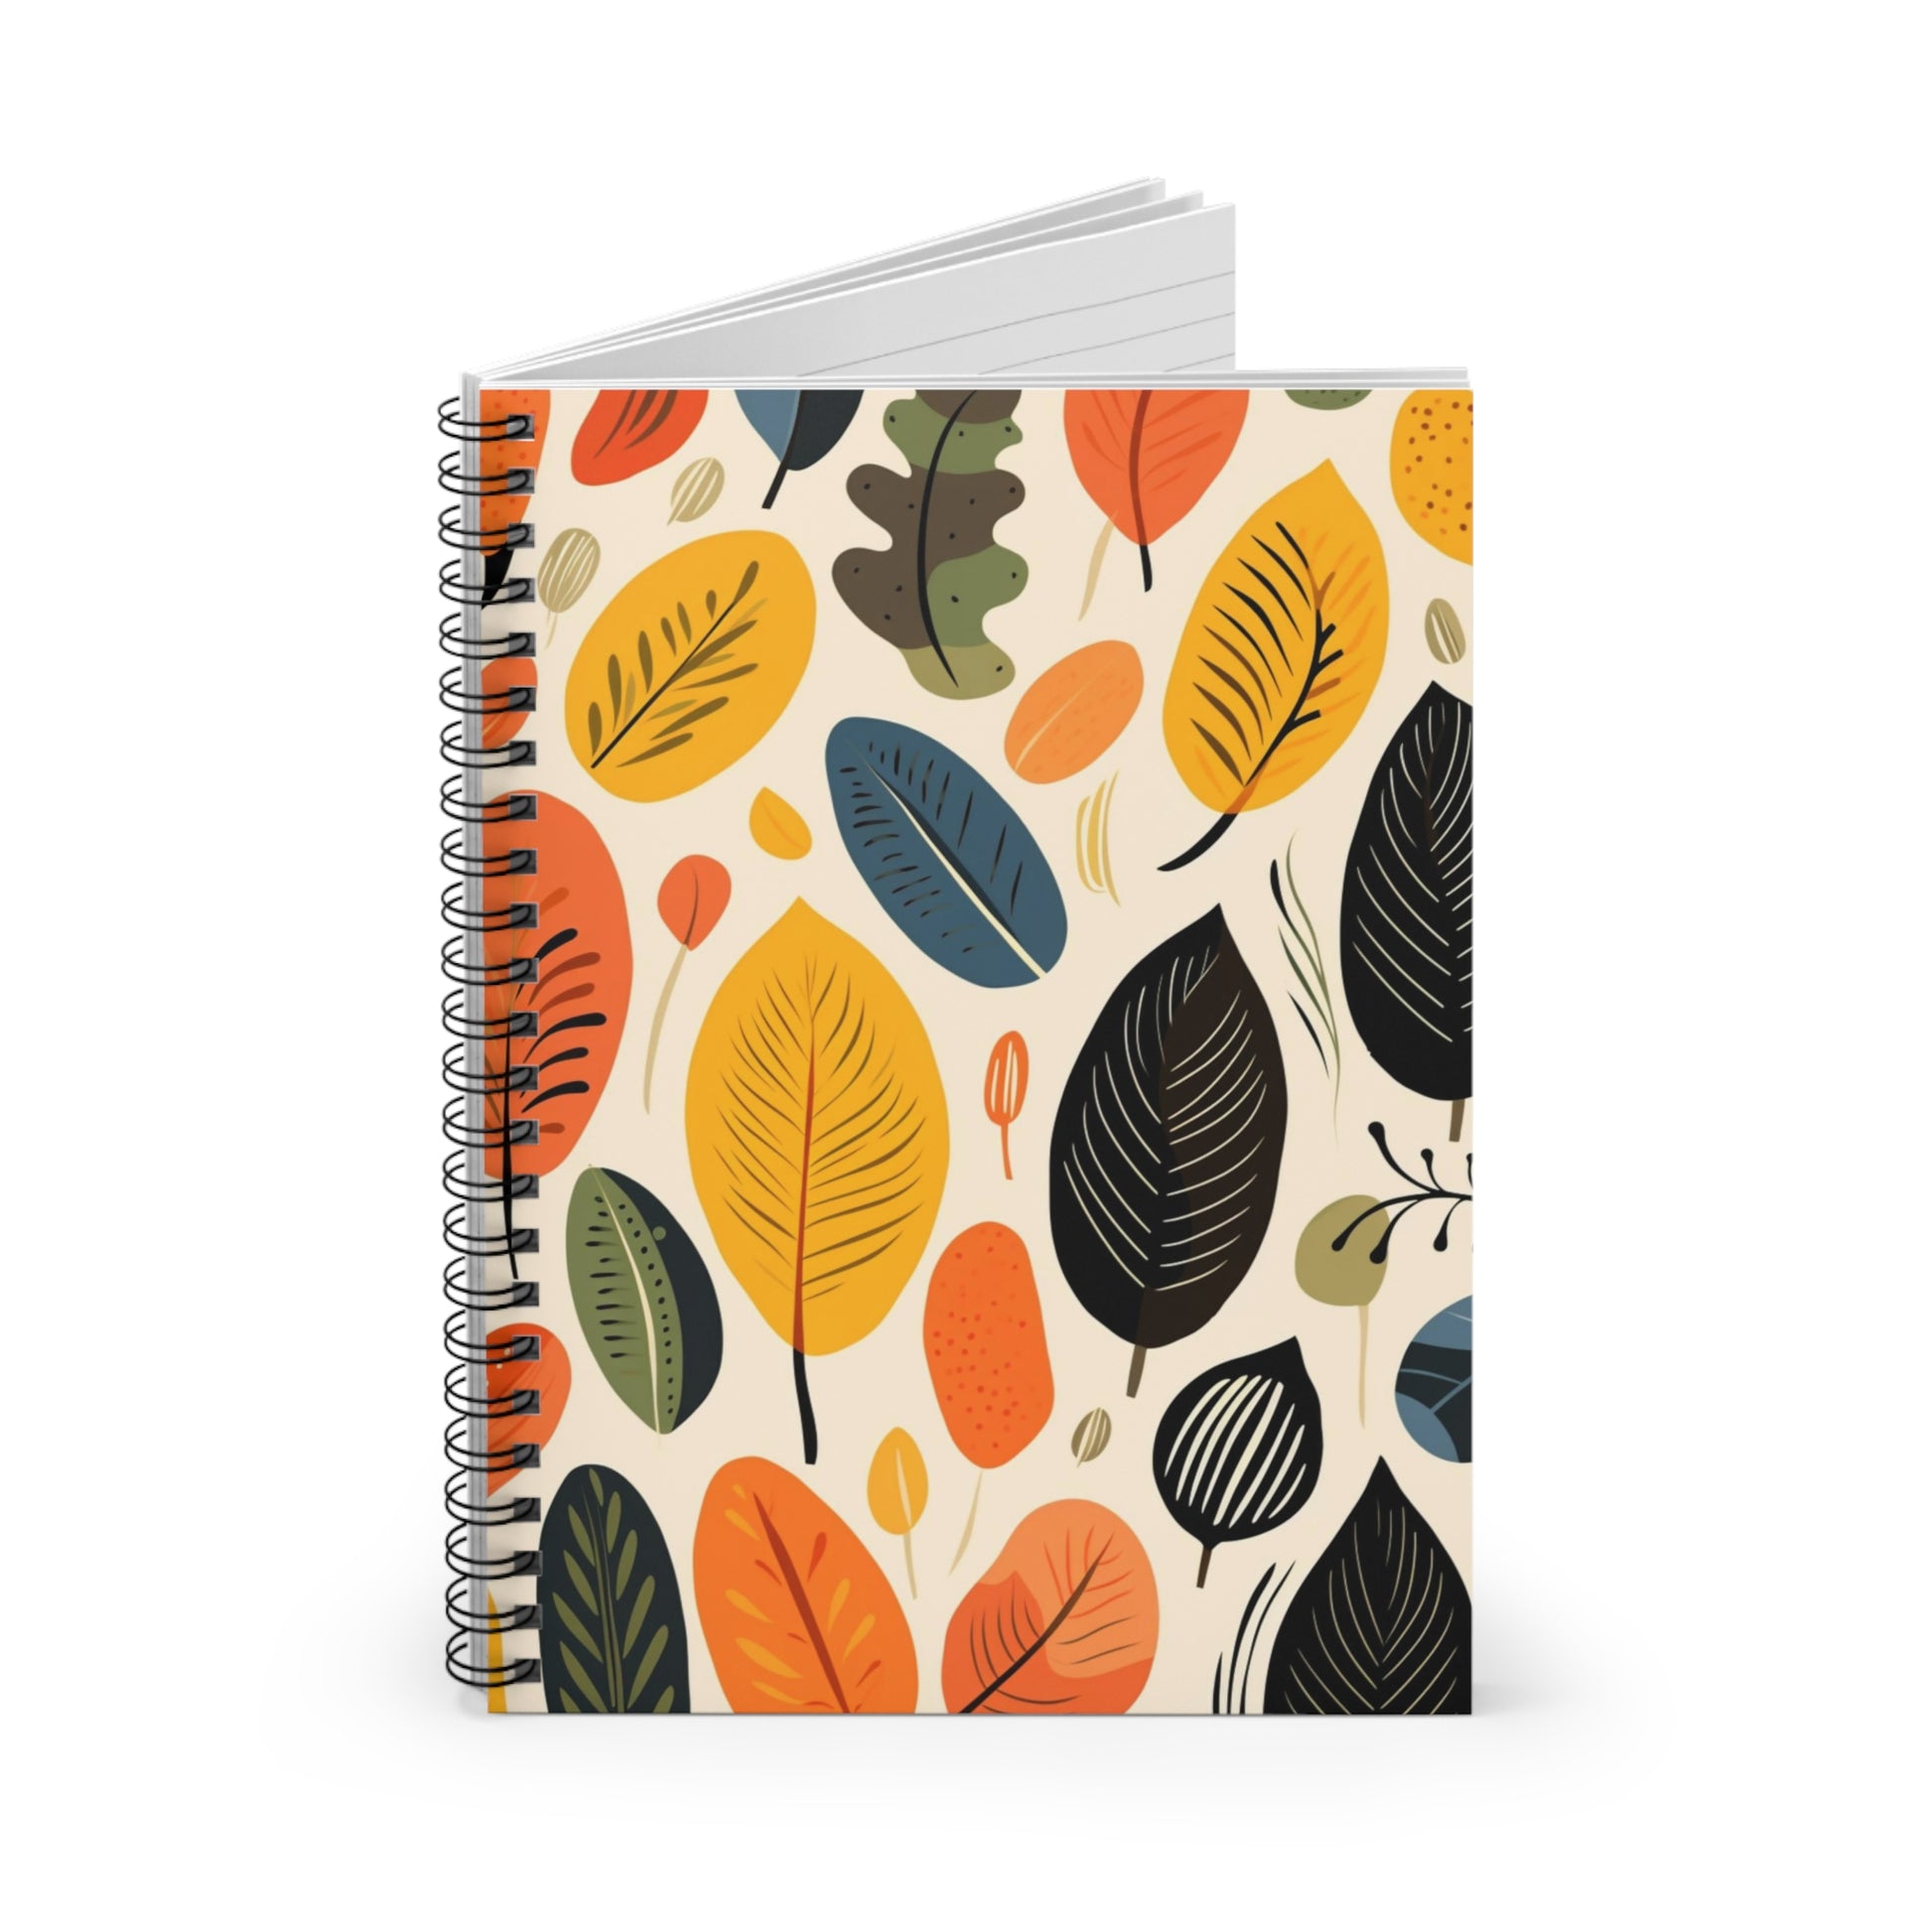 Boho Leaves Spiral Bound Notebook, Earthy Travel Pattern Design Small Journal Notepad Ruled Line Book Paper Pad Work Aesthetic Starcove Fashion